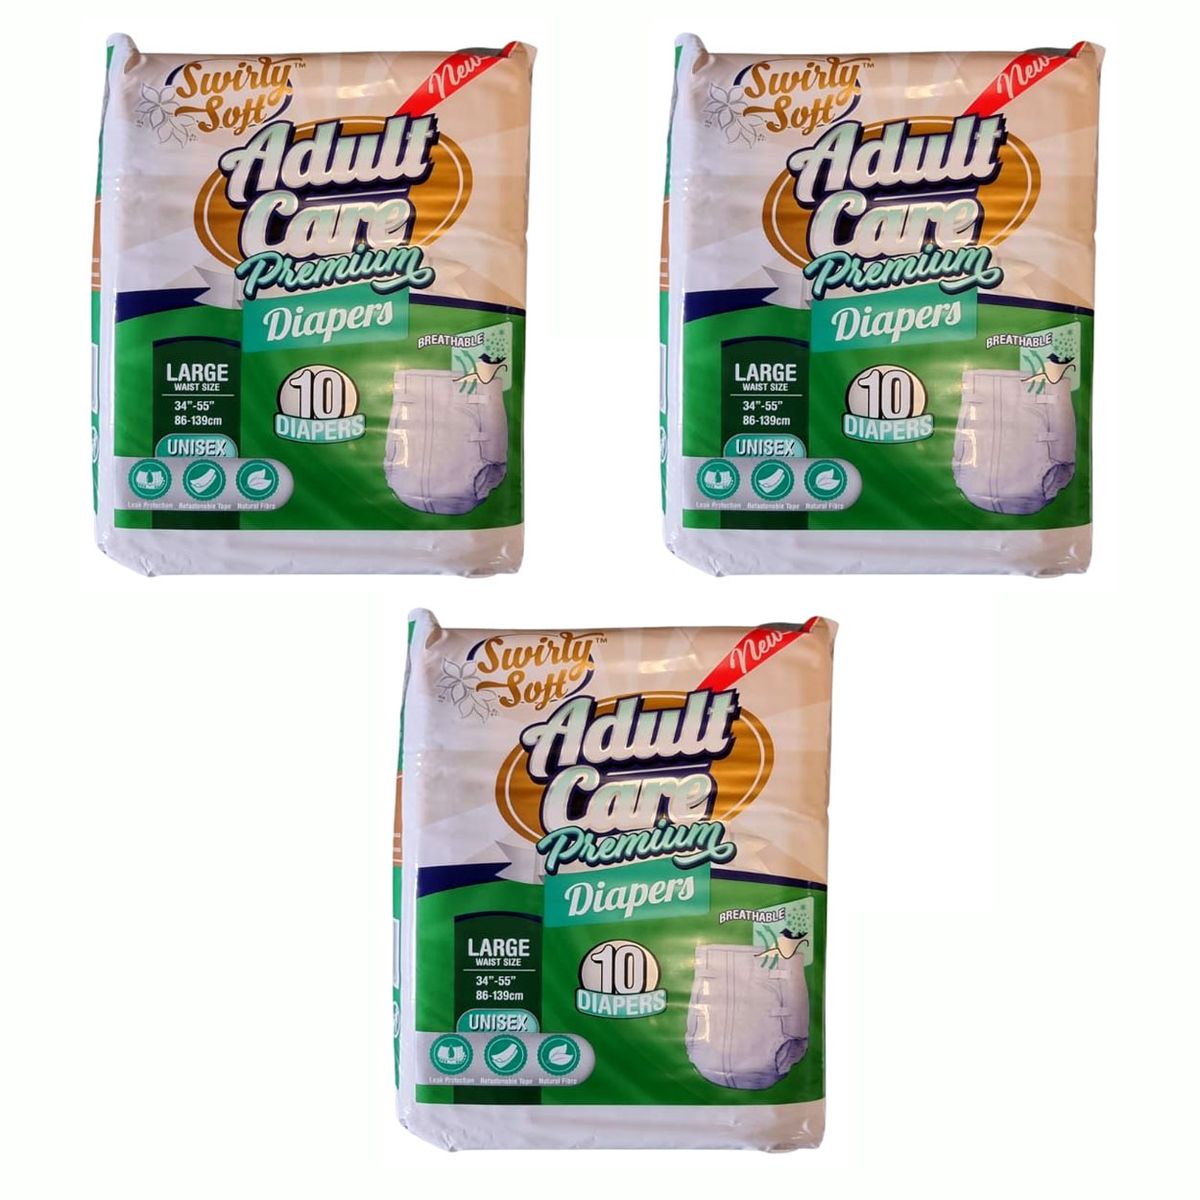 Premium Adult Care - Soft Breathable Adult Diapers - Large - 30